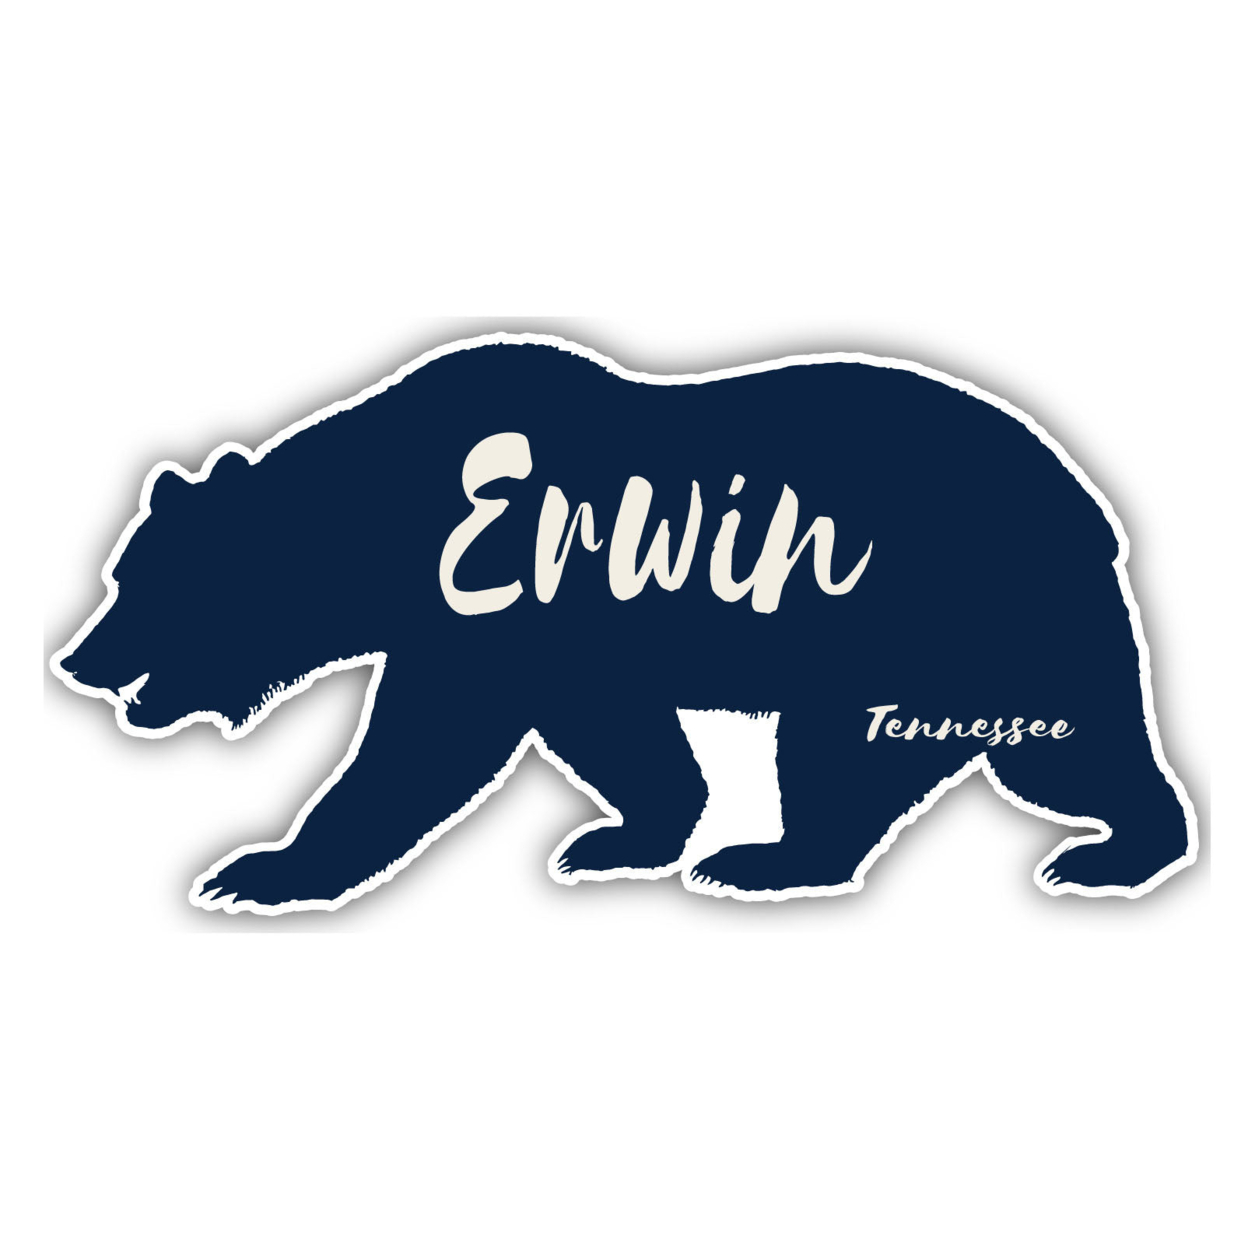 Erwin Tennessee Souvenir Decorative Stickers (Choose Theme And Size) - Single Unit, 12-Inch, Bear